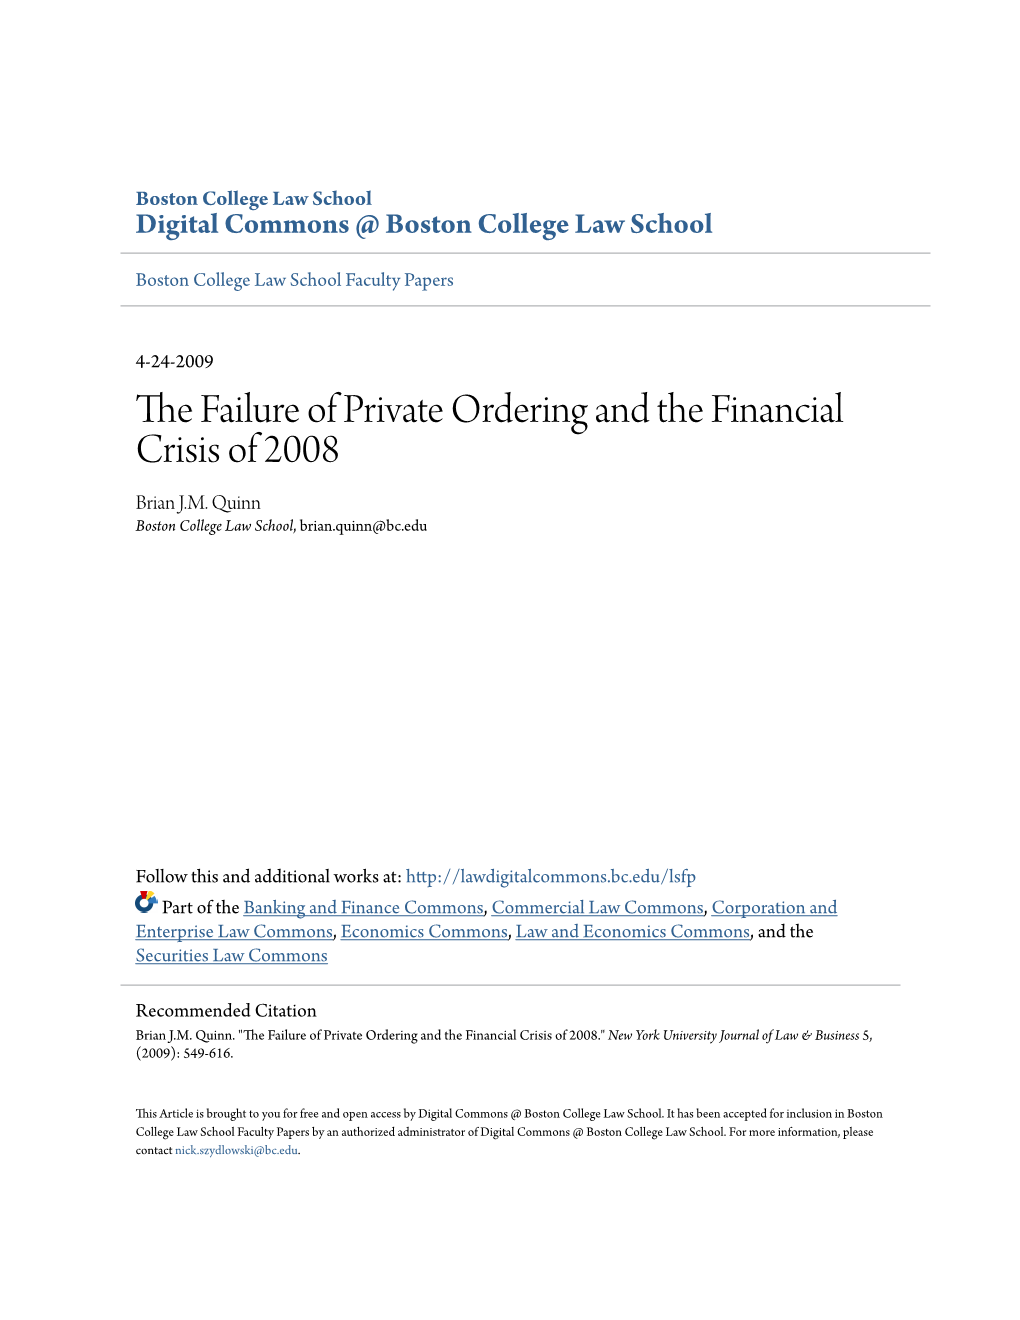 The Failure of Private Ordering and the Financial Crisis of 2008